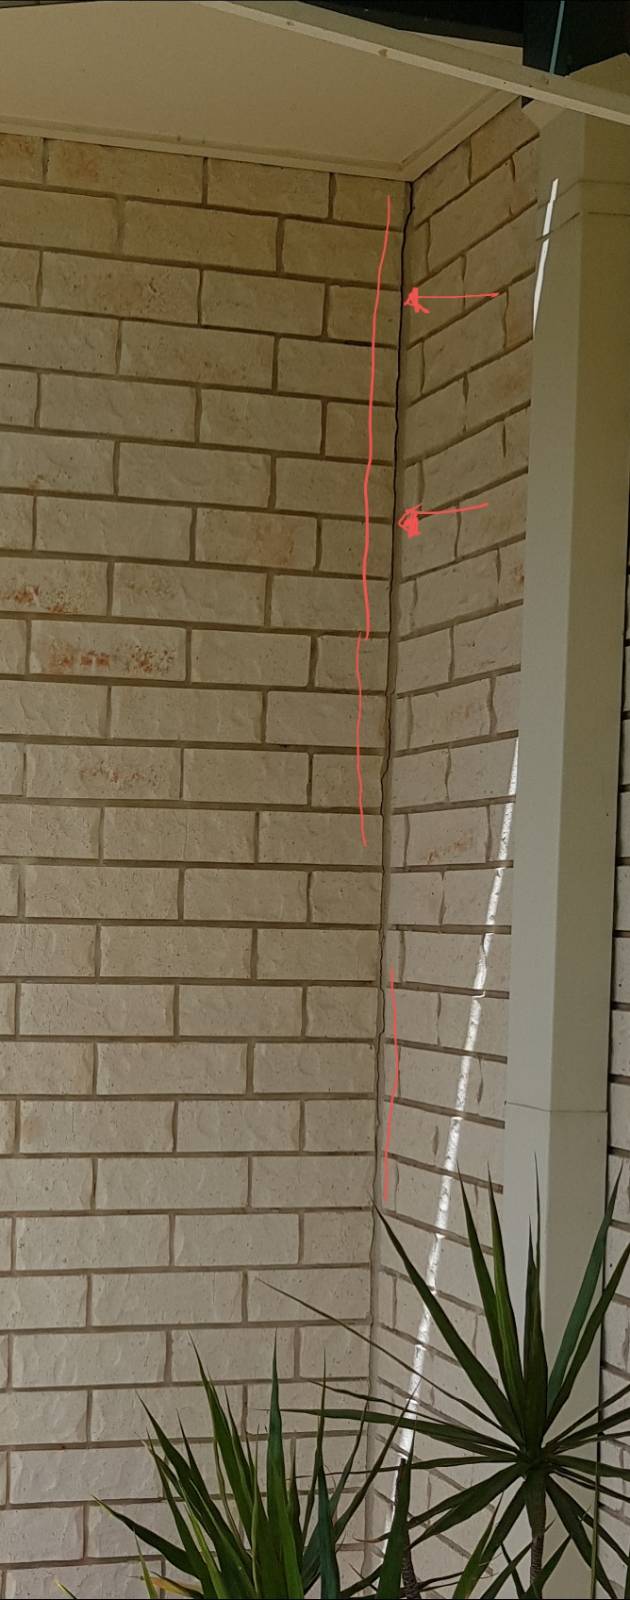 What product to use in fixing cracks in corner mortar